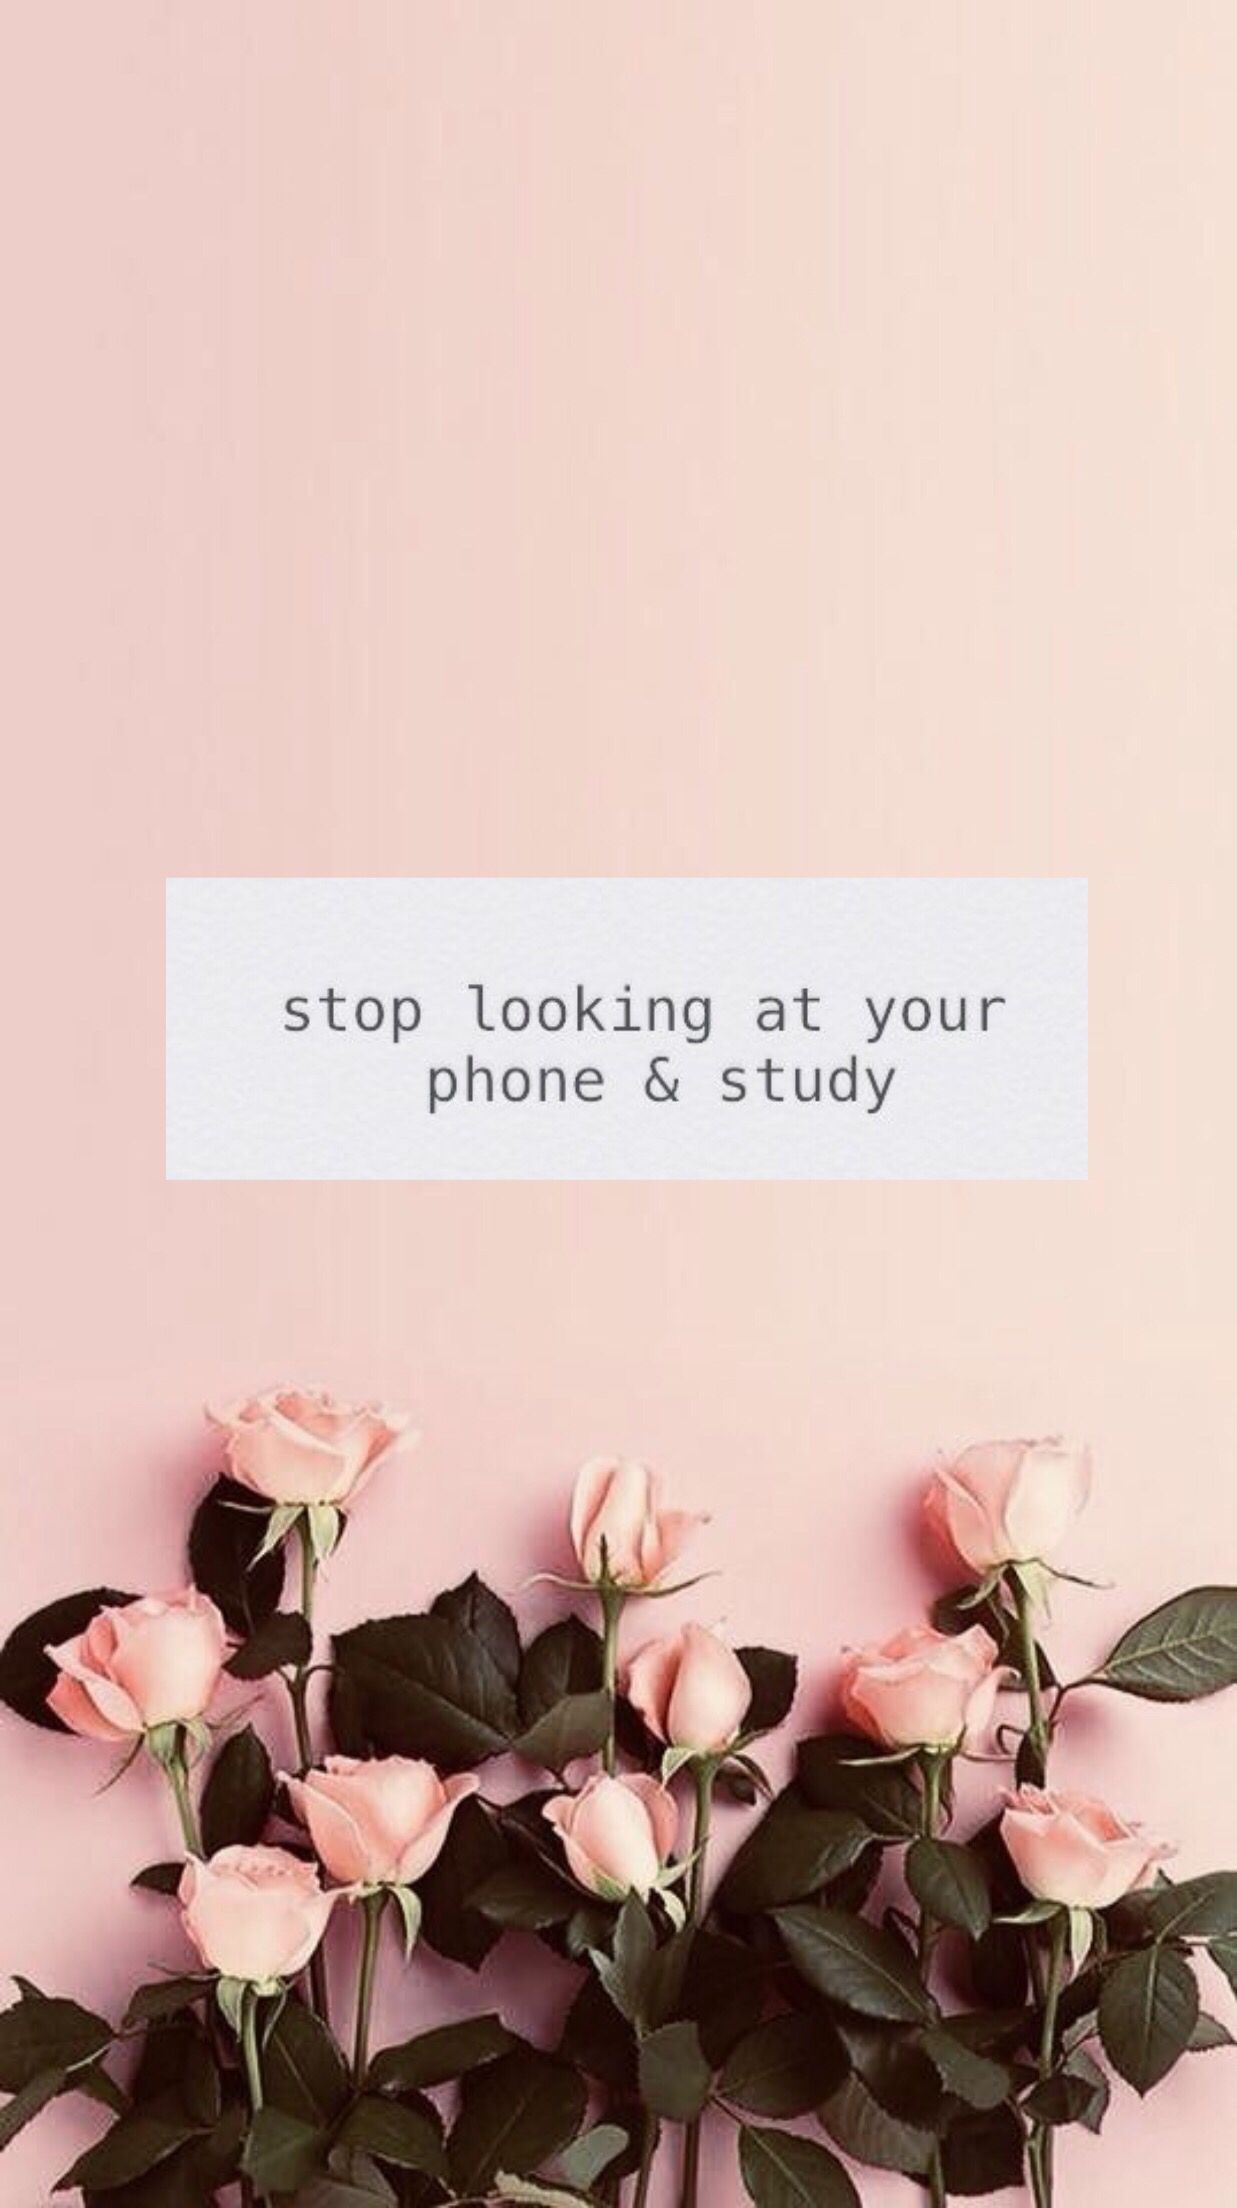 Study Motivation Wallpaper #studymotivationquotes this is your sign to study! ·.·´¯`·.· fol. Study inspiration quotes, Study motivation quotes, Study motivation